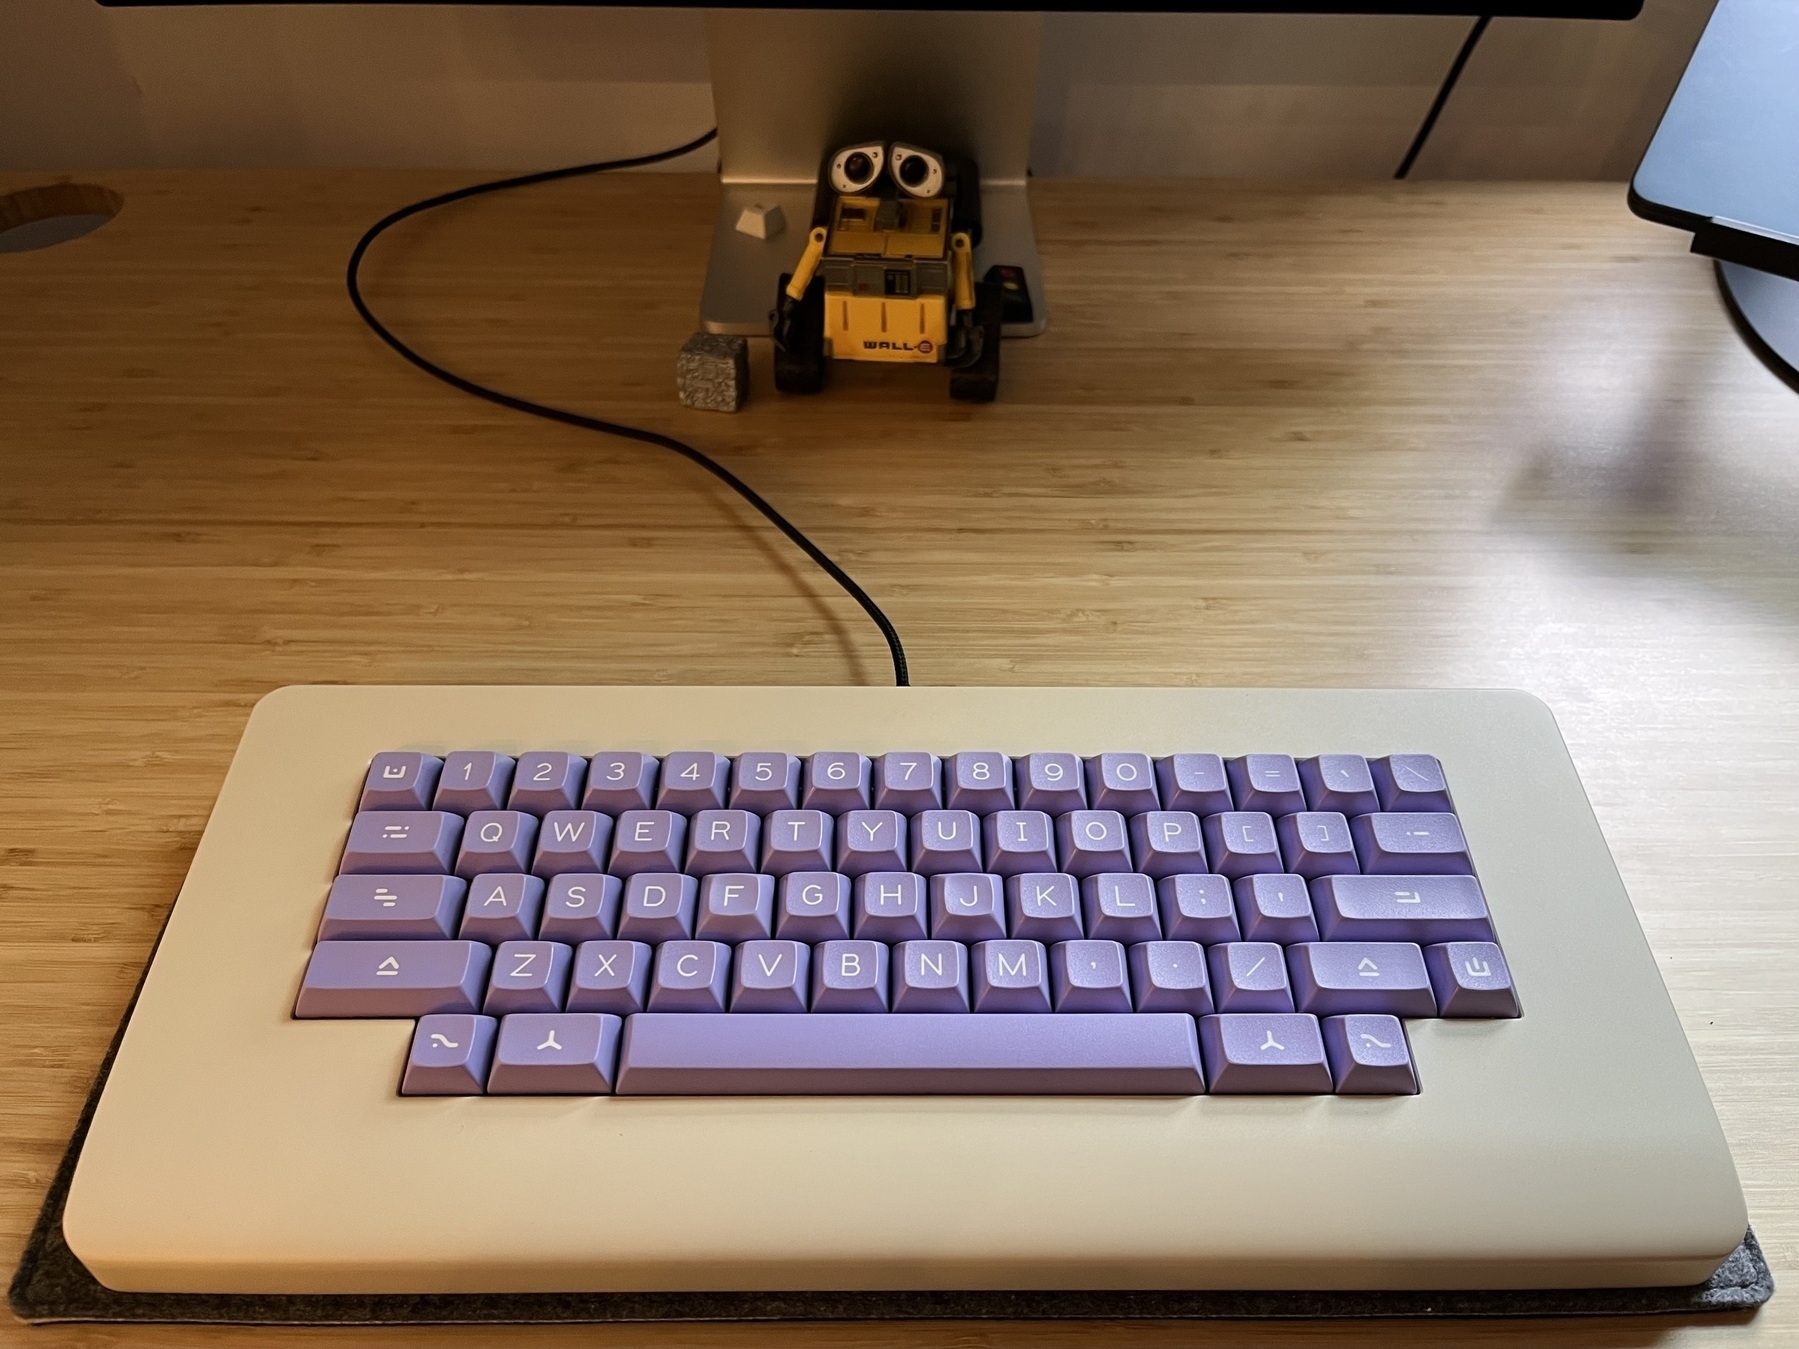 The Piggy mechanical keyboard on the Keebmat deskmat. The Piggy is on a bamboo colored desk. The little action figure of Walle is visible in the background.